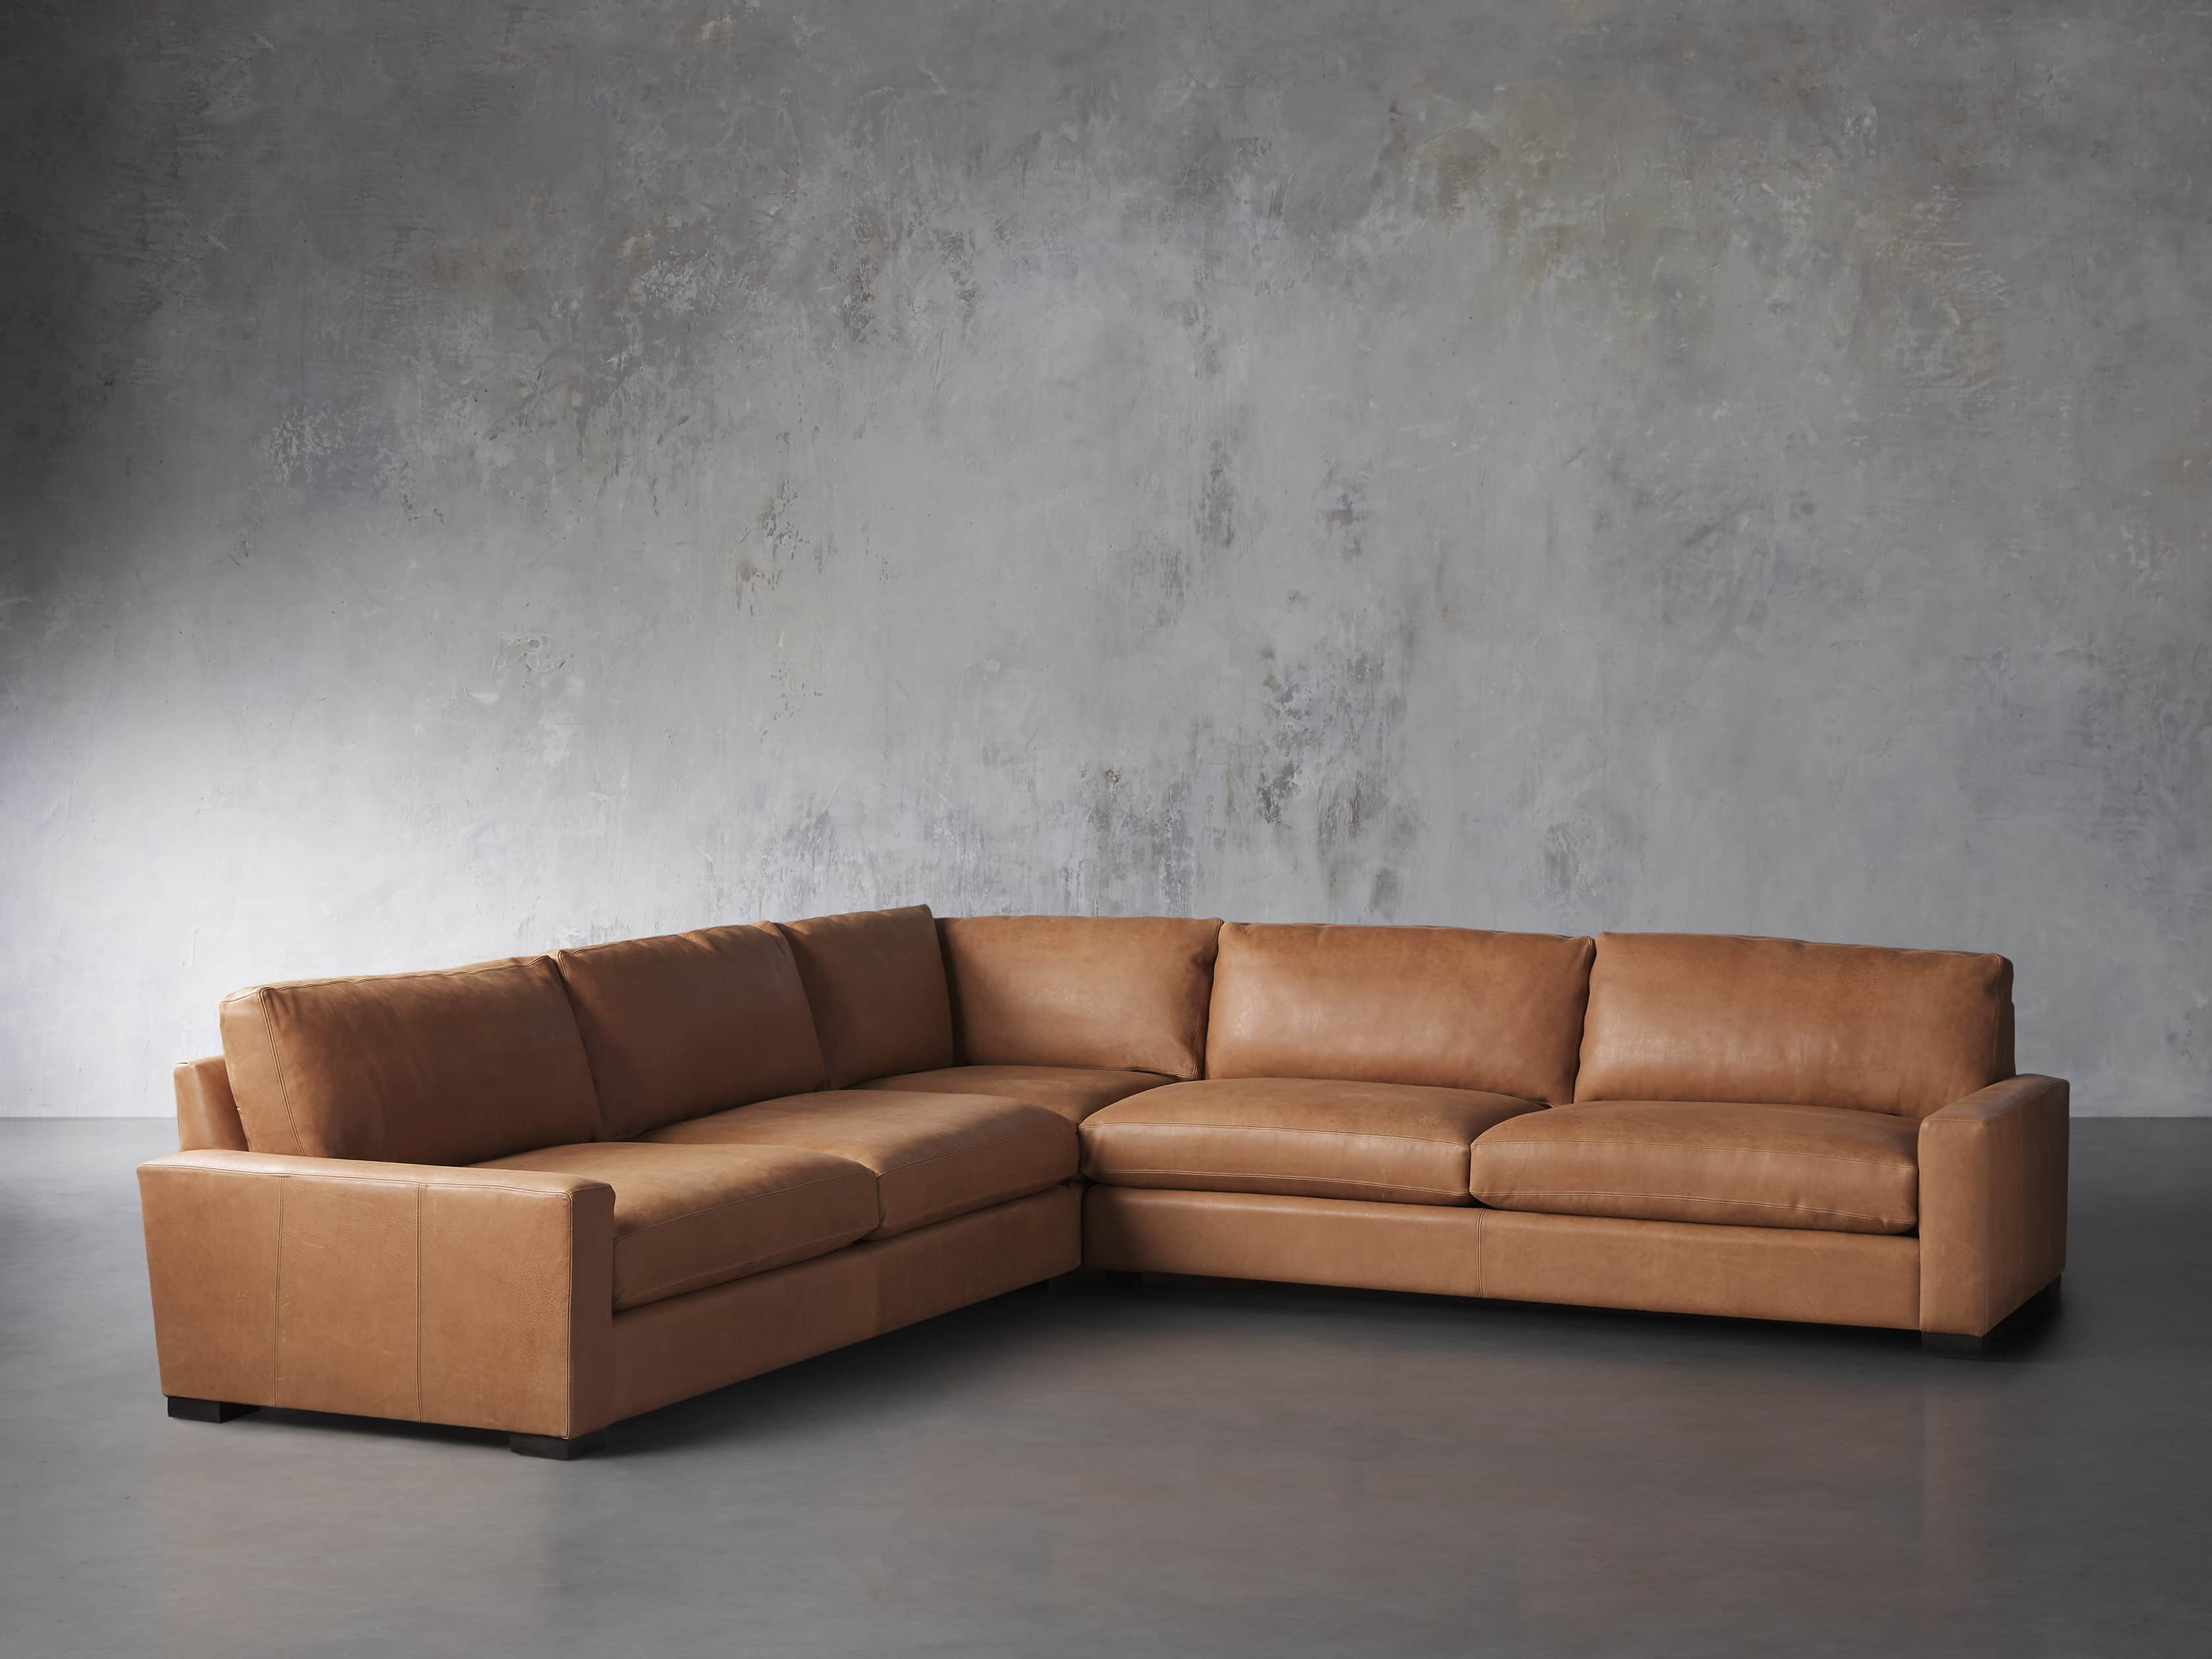 Remington Leather Three Piece Sectional, Distressed Leather Sectional Furniture